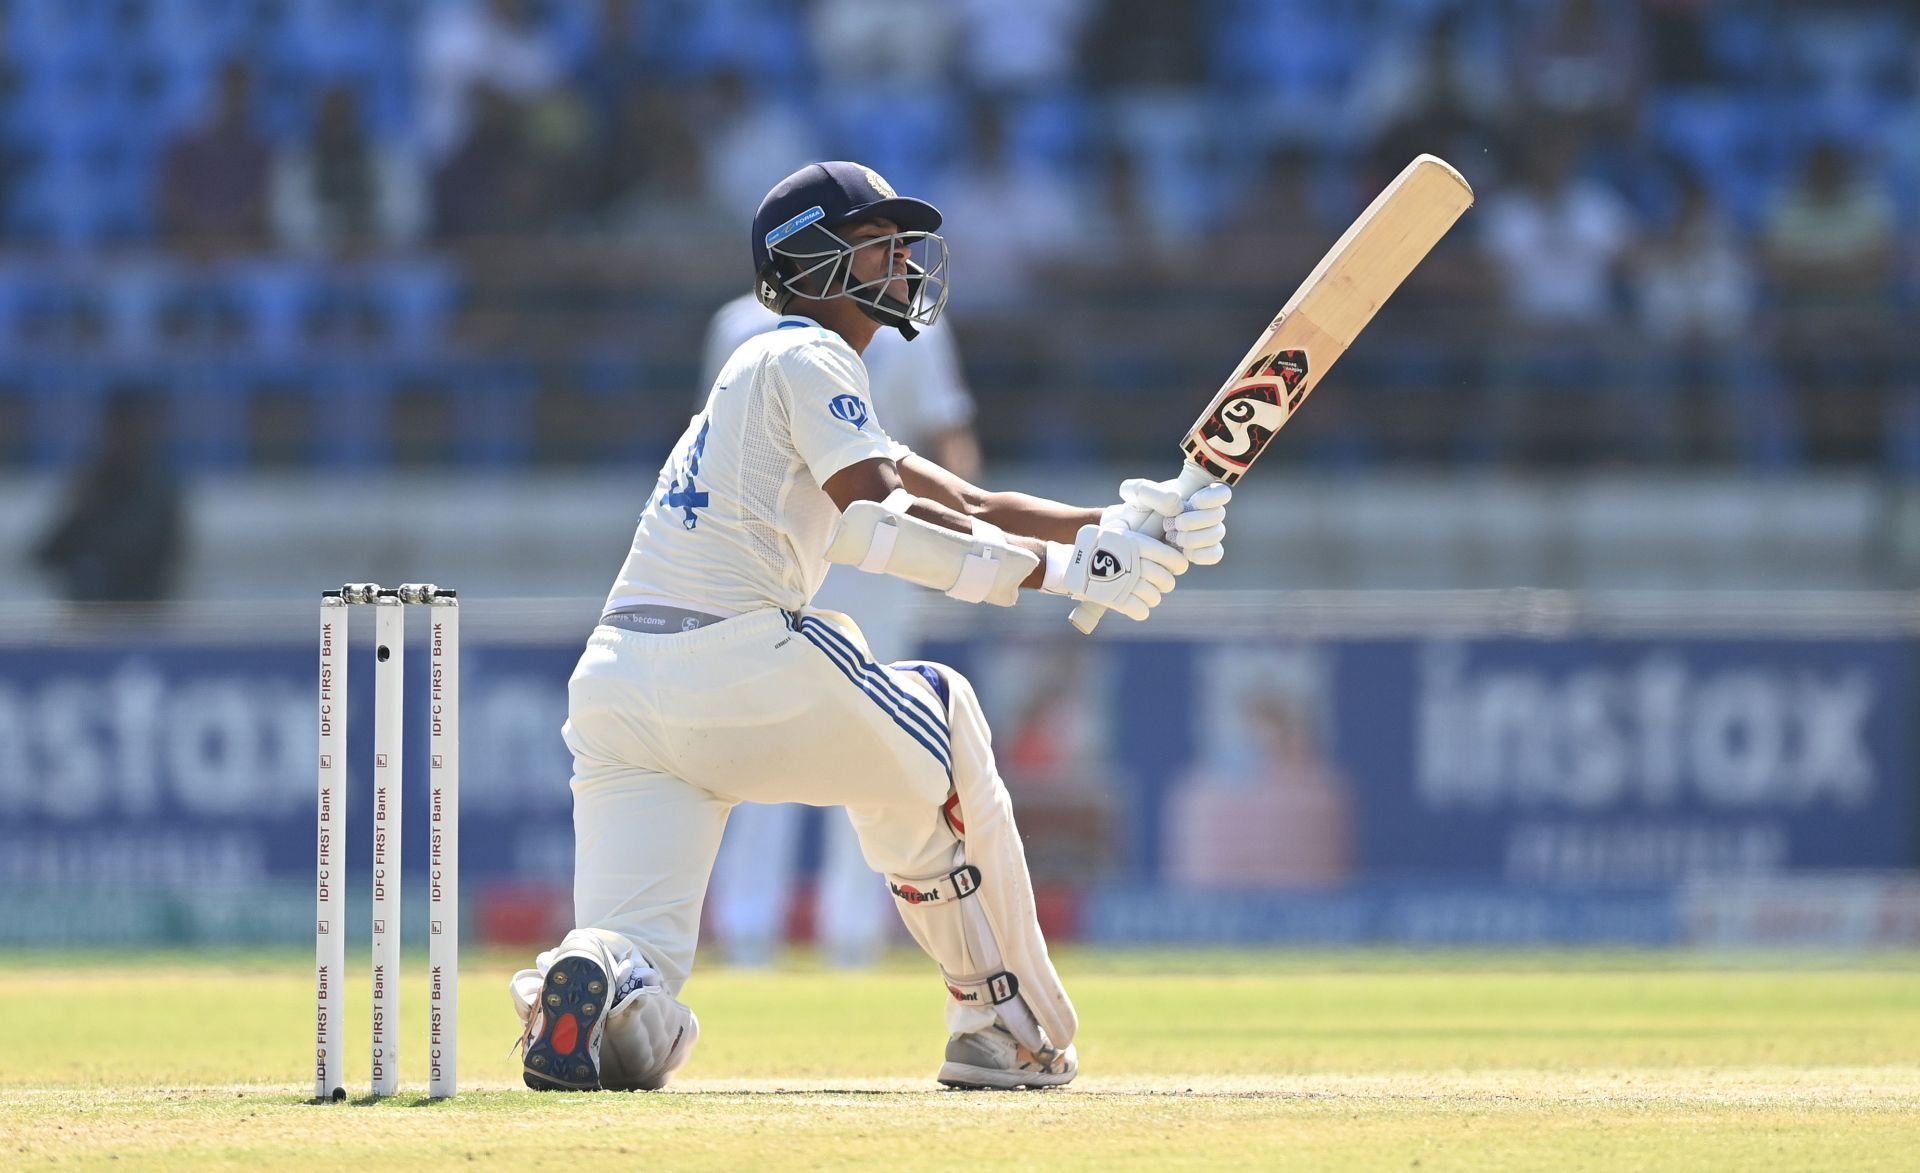 Yashasvi Jaiswal struck 14 fours and 12 sixes during his innings. [P/C: Getty]